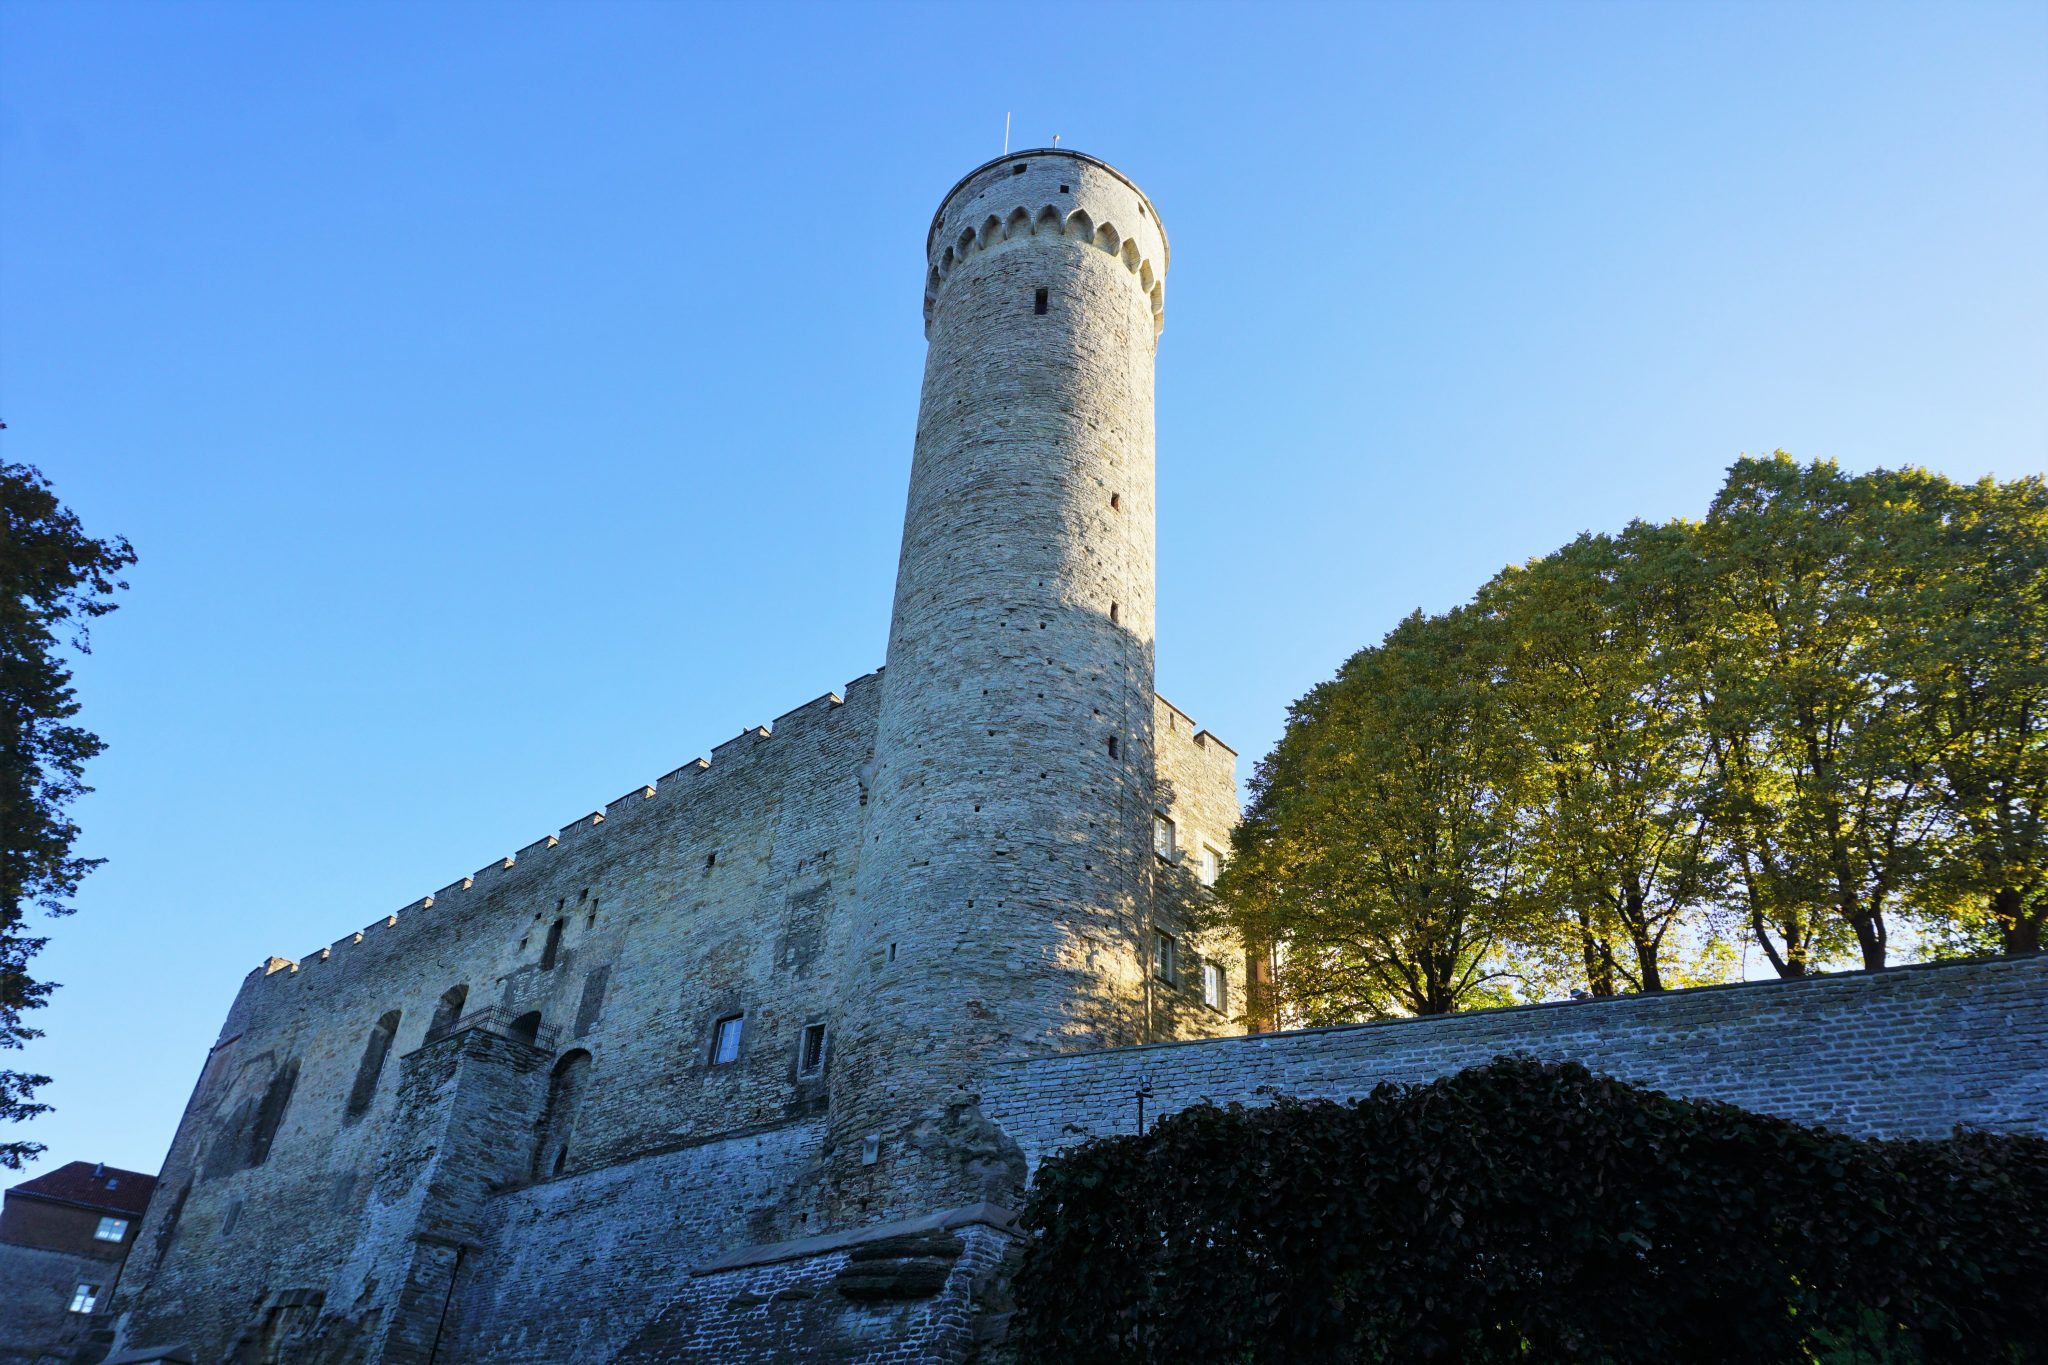 Top Things to Do in Tallinn, Estonia on a Cruise